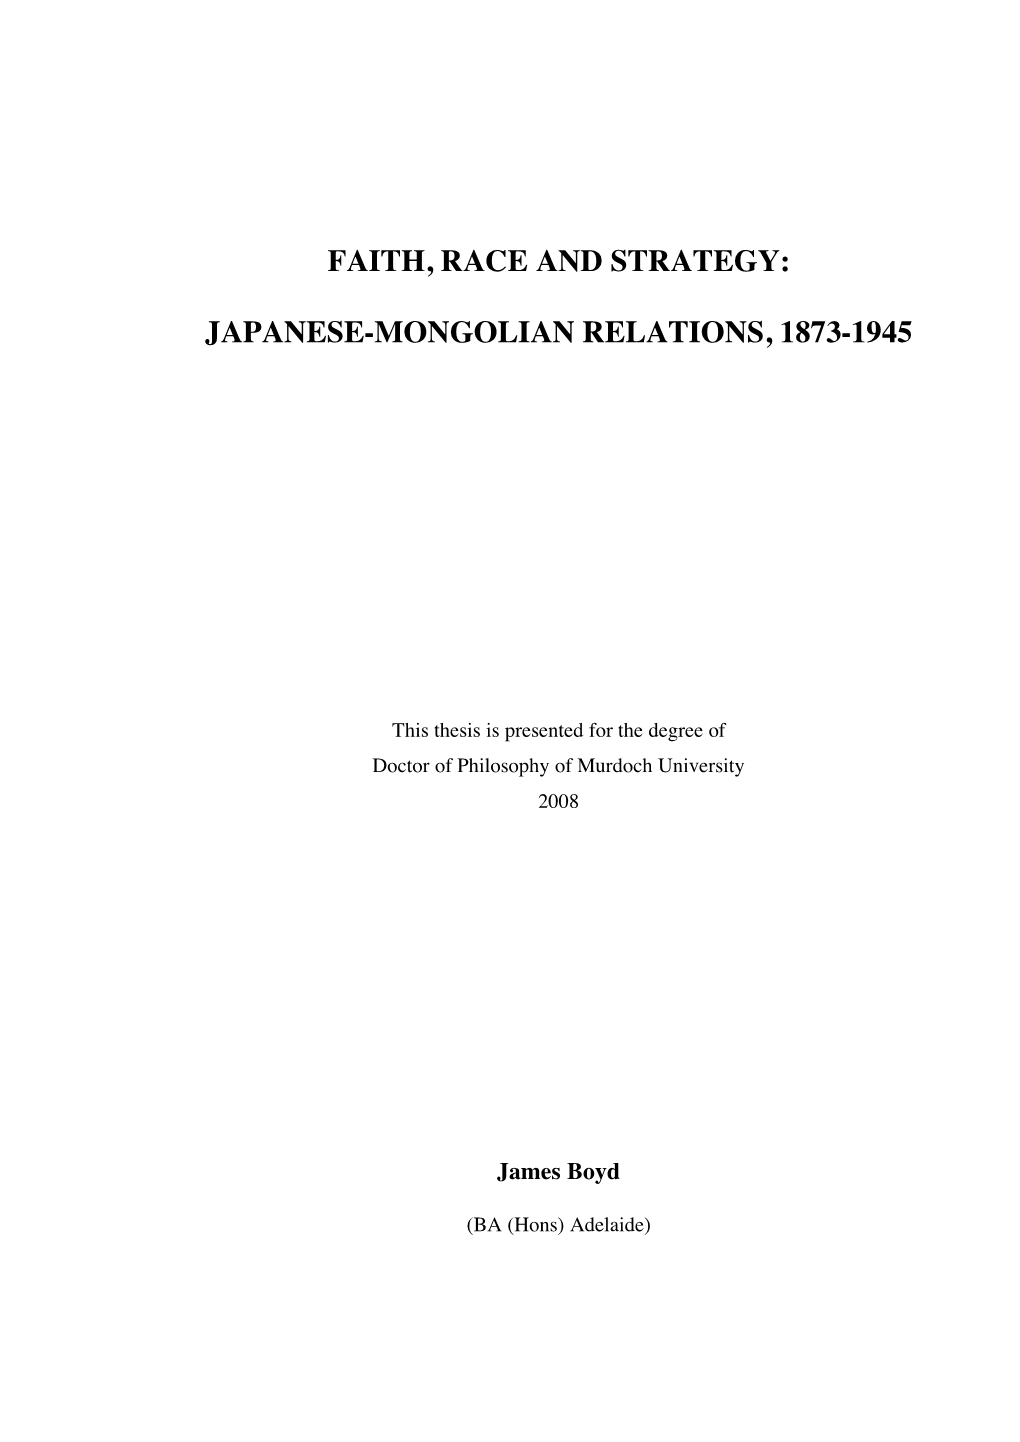 Faith, Race and Strategy: Japanese-Mongolian Relations, 1873-1945